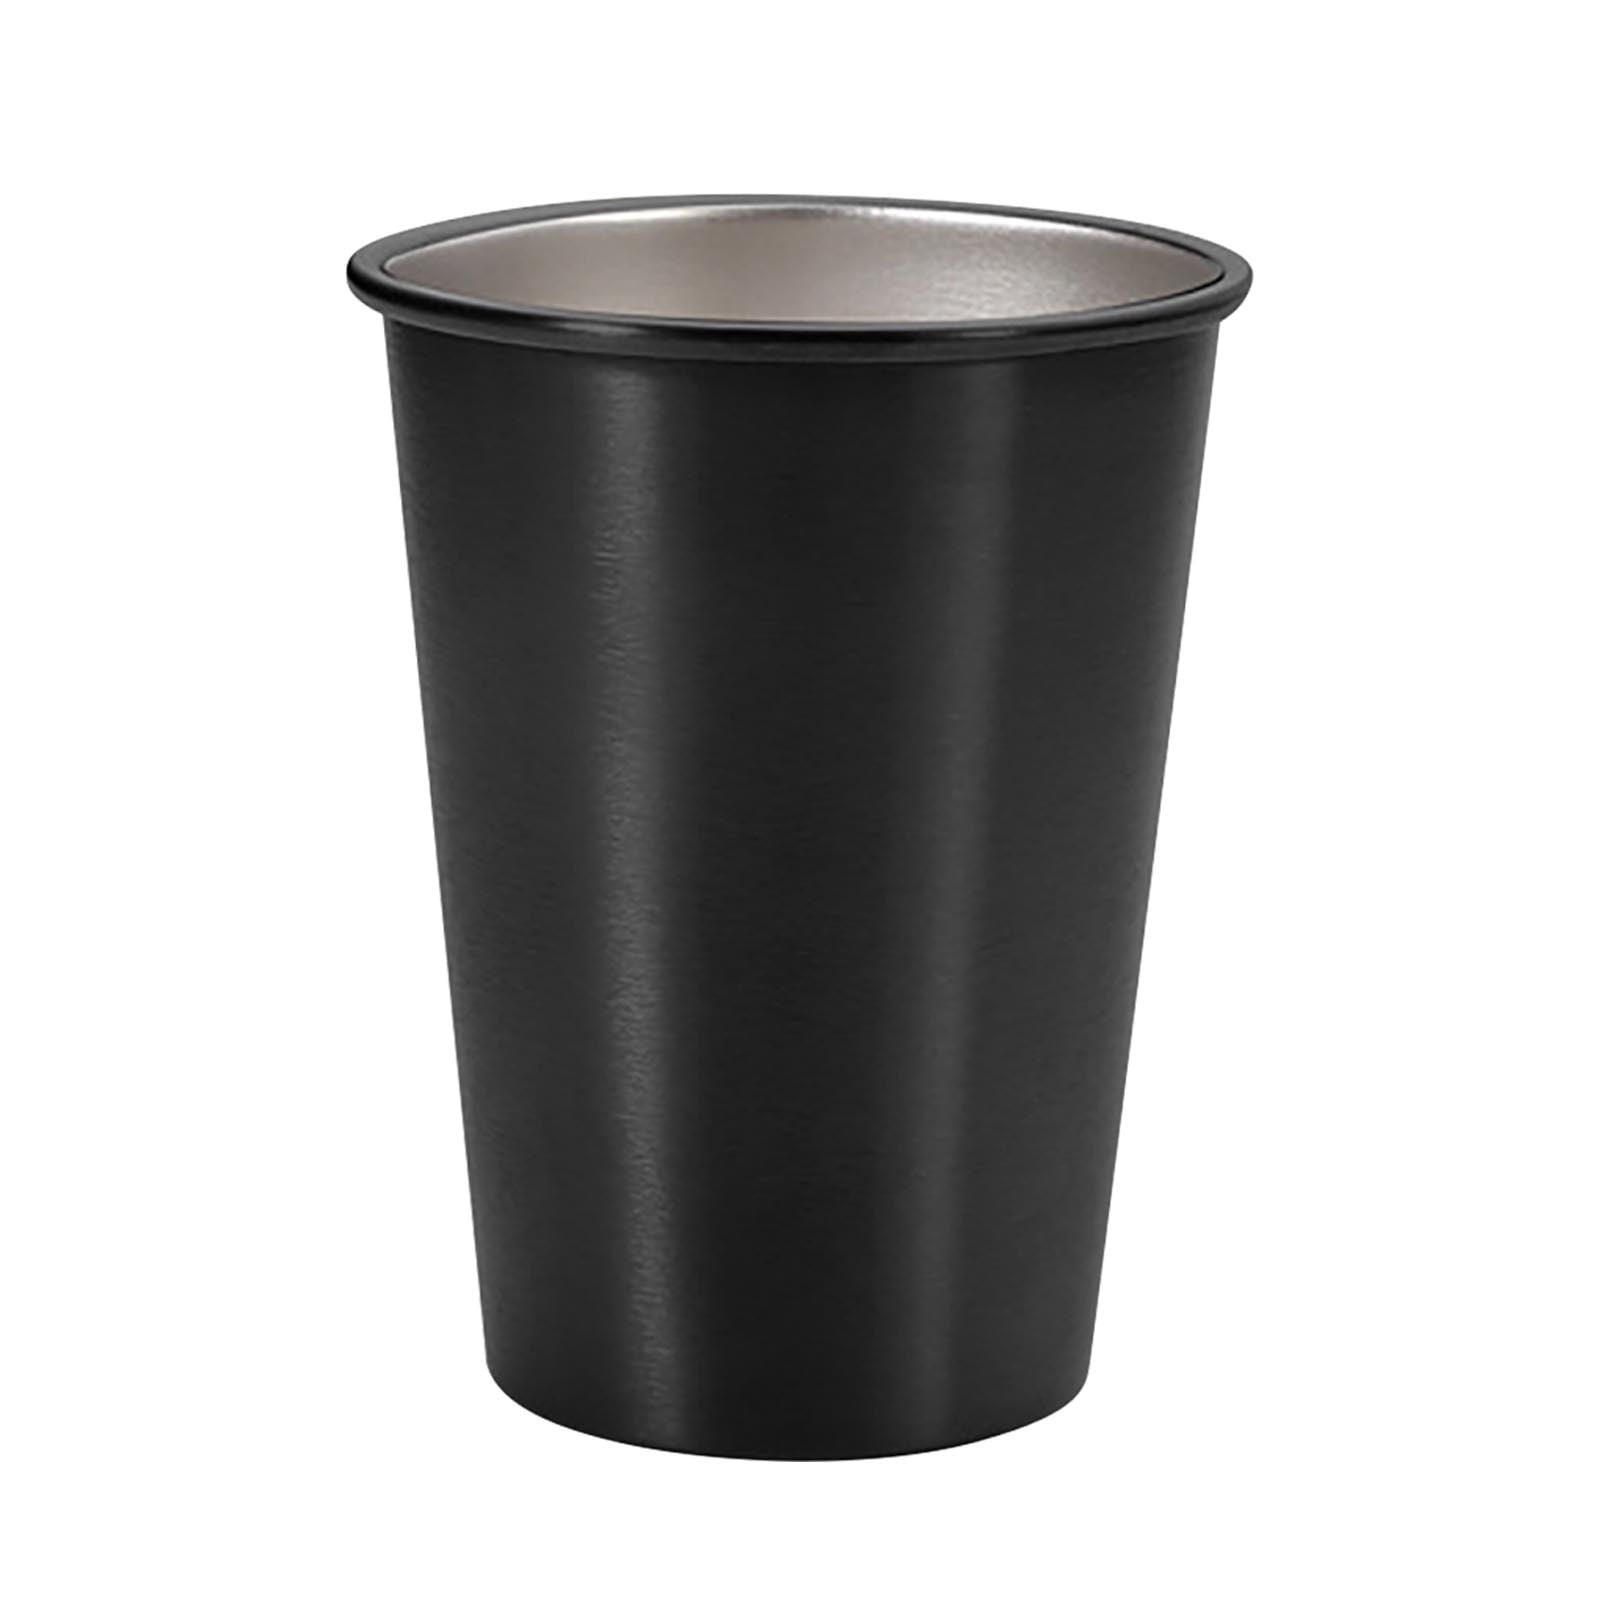 Buy Clean, Disposable and Hygienic 16 Oz Aluminum Cup 